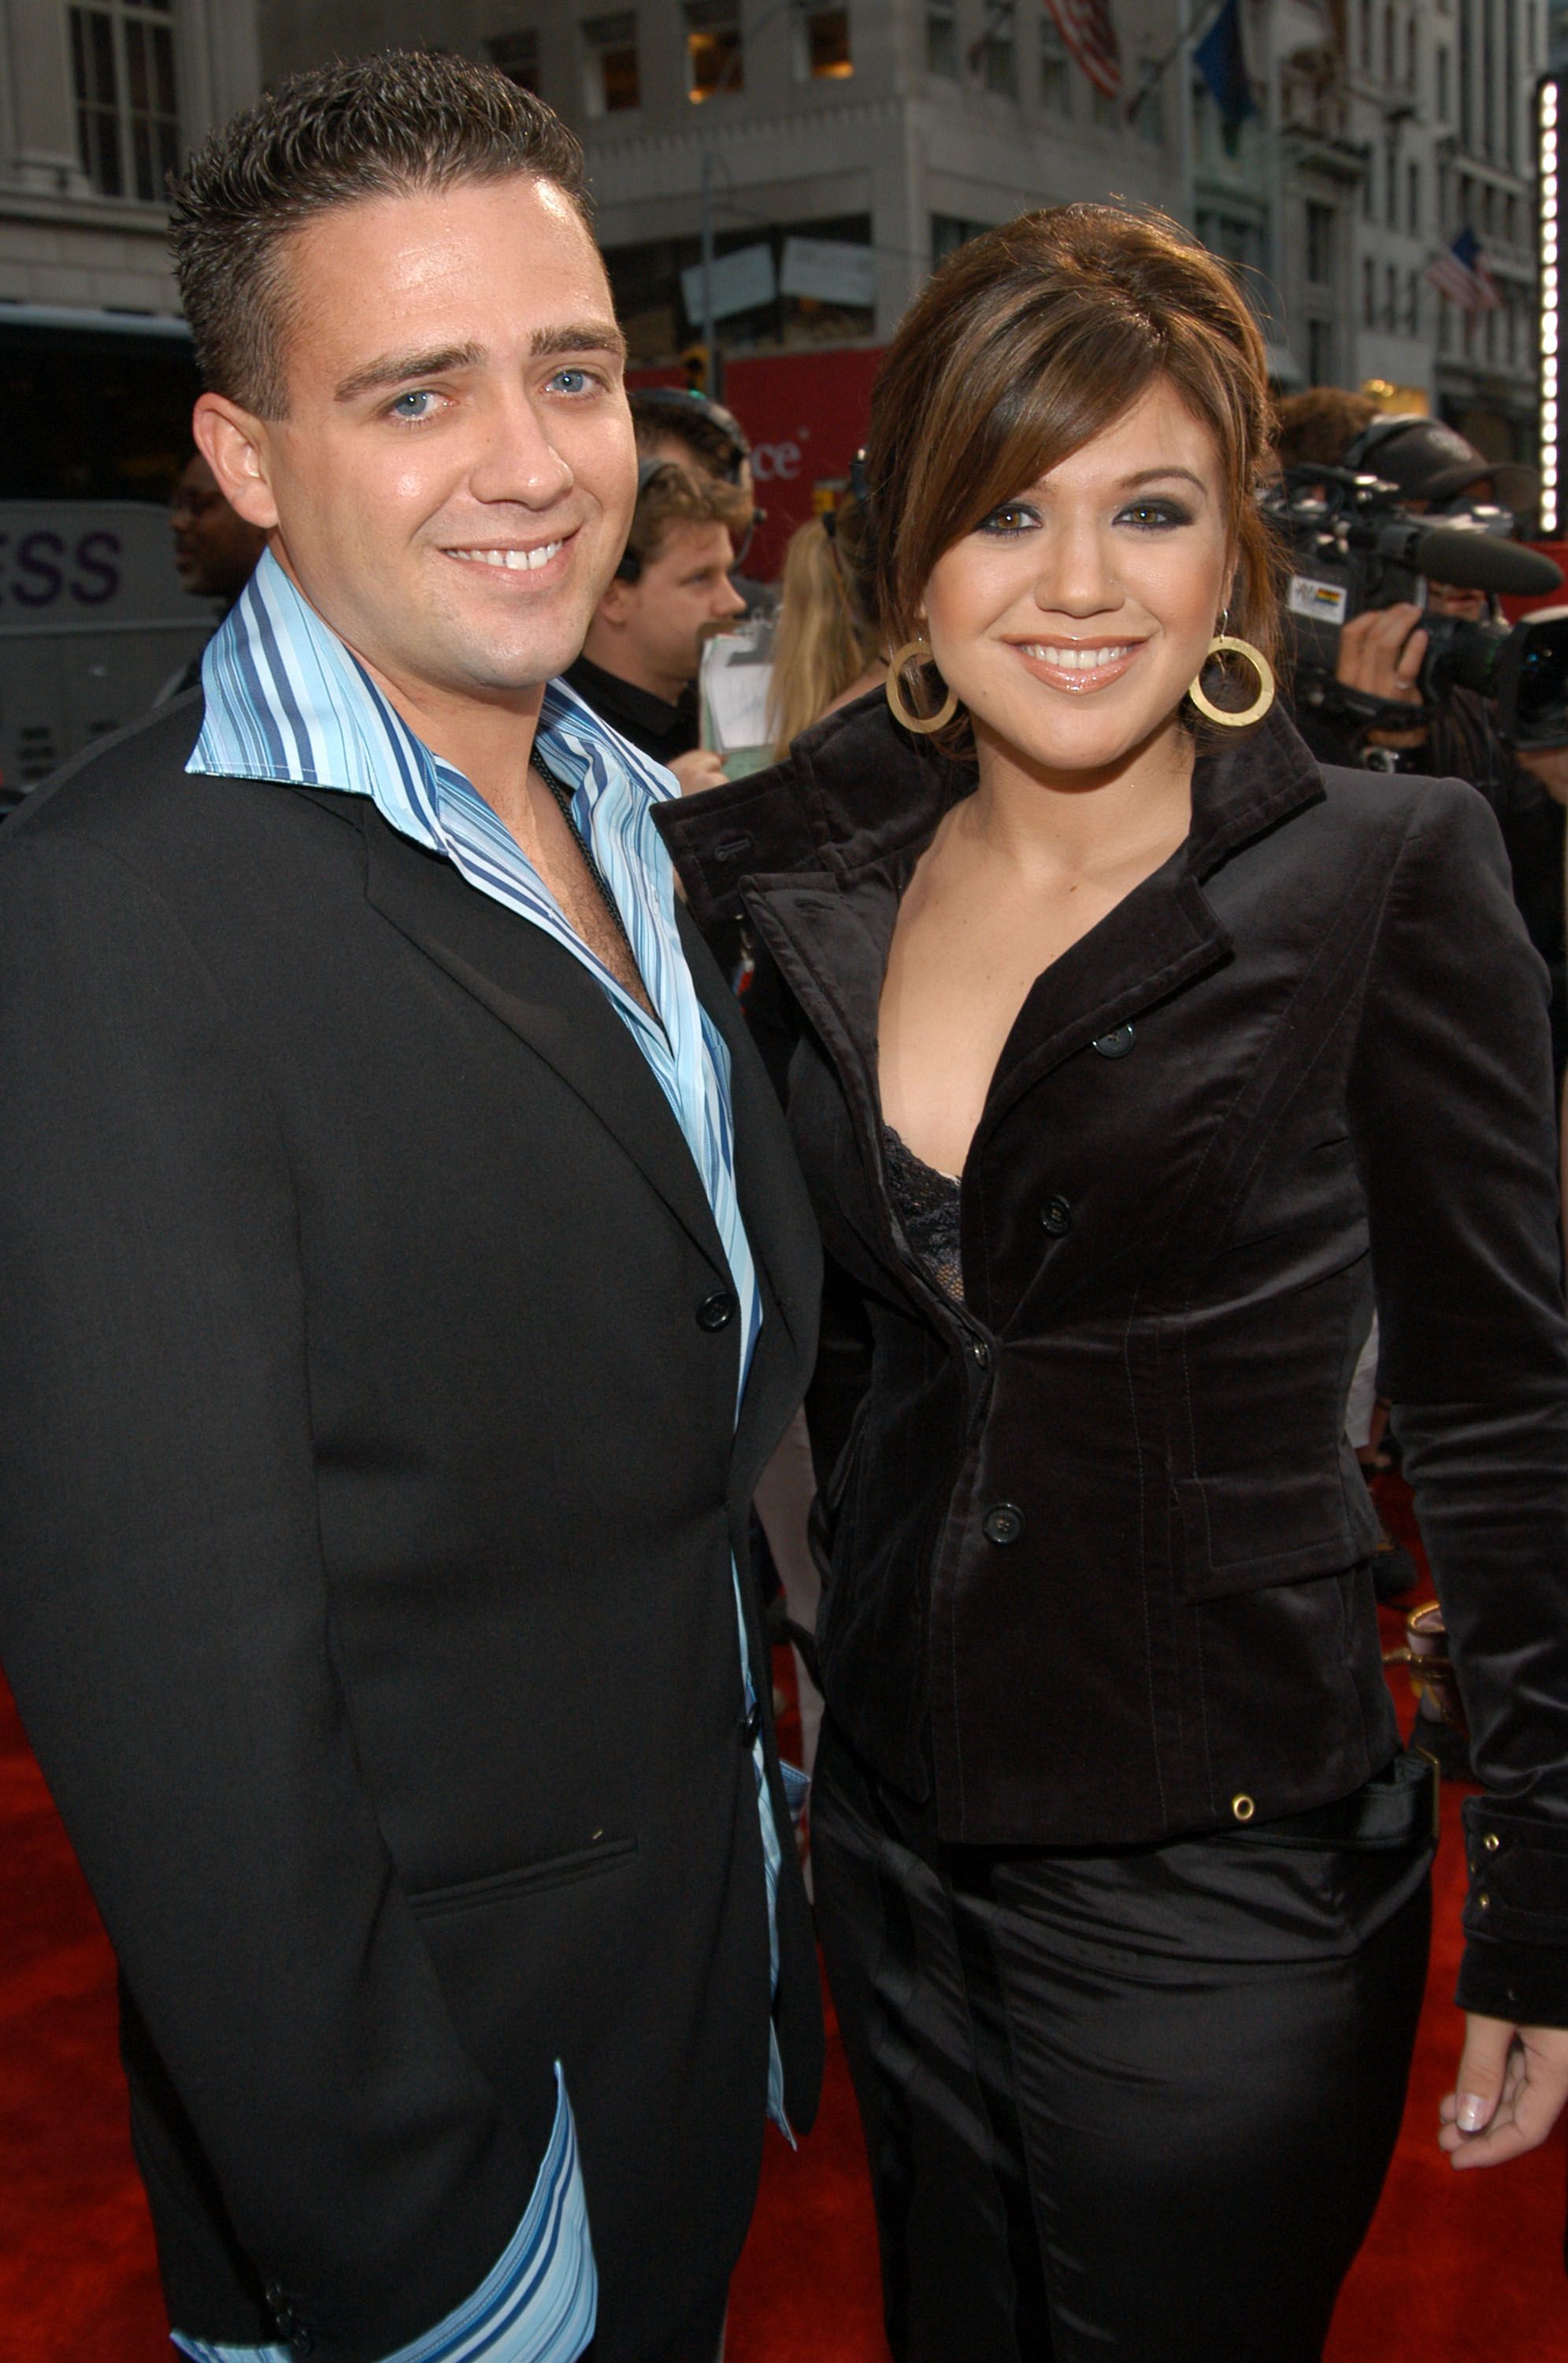 Jason Clarkson and Kelly Clarkson at the Radio City Music Hall in New York City,2003| Photo:Getty Images